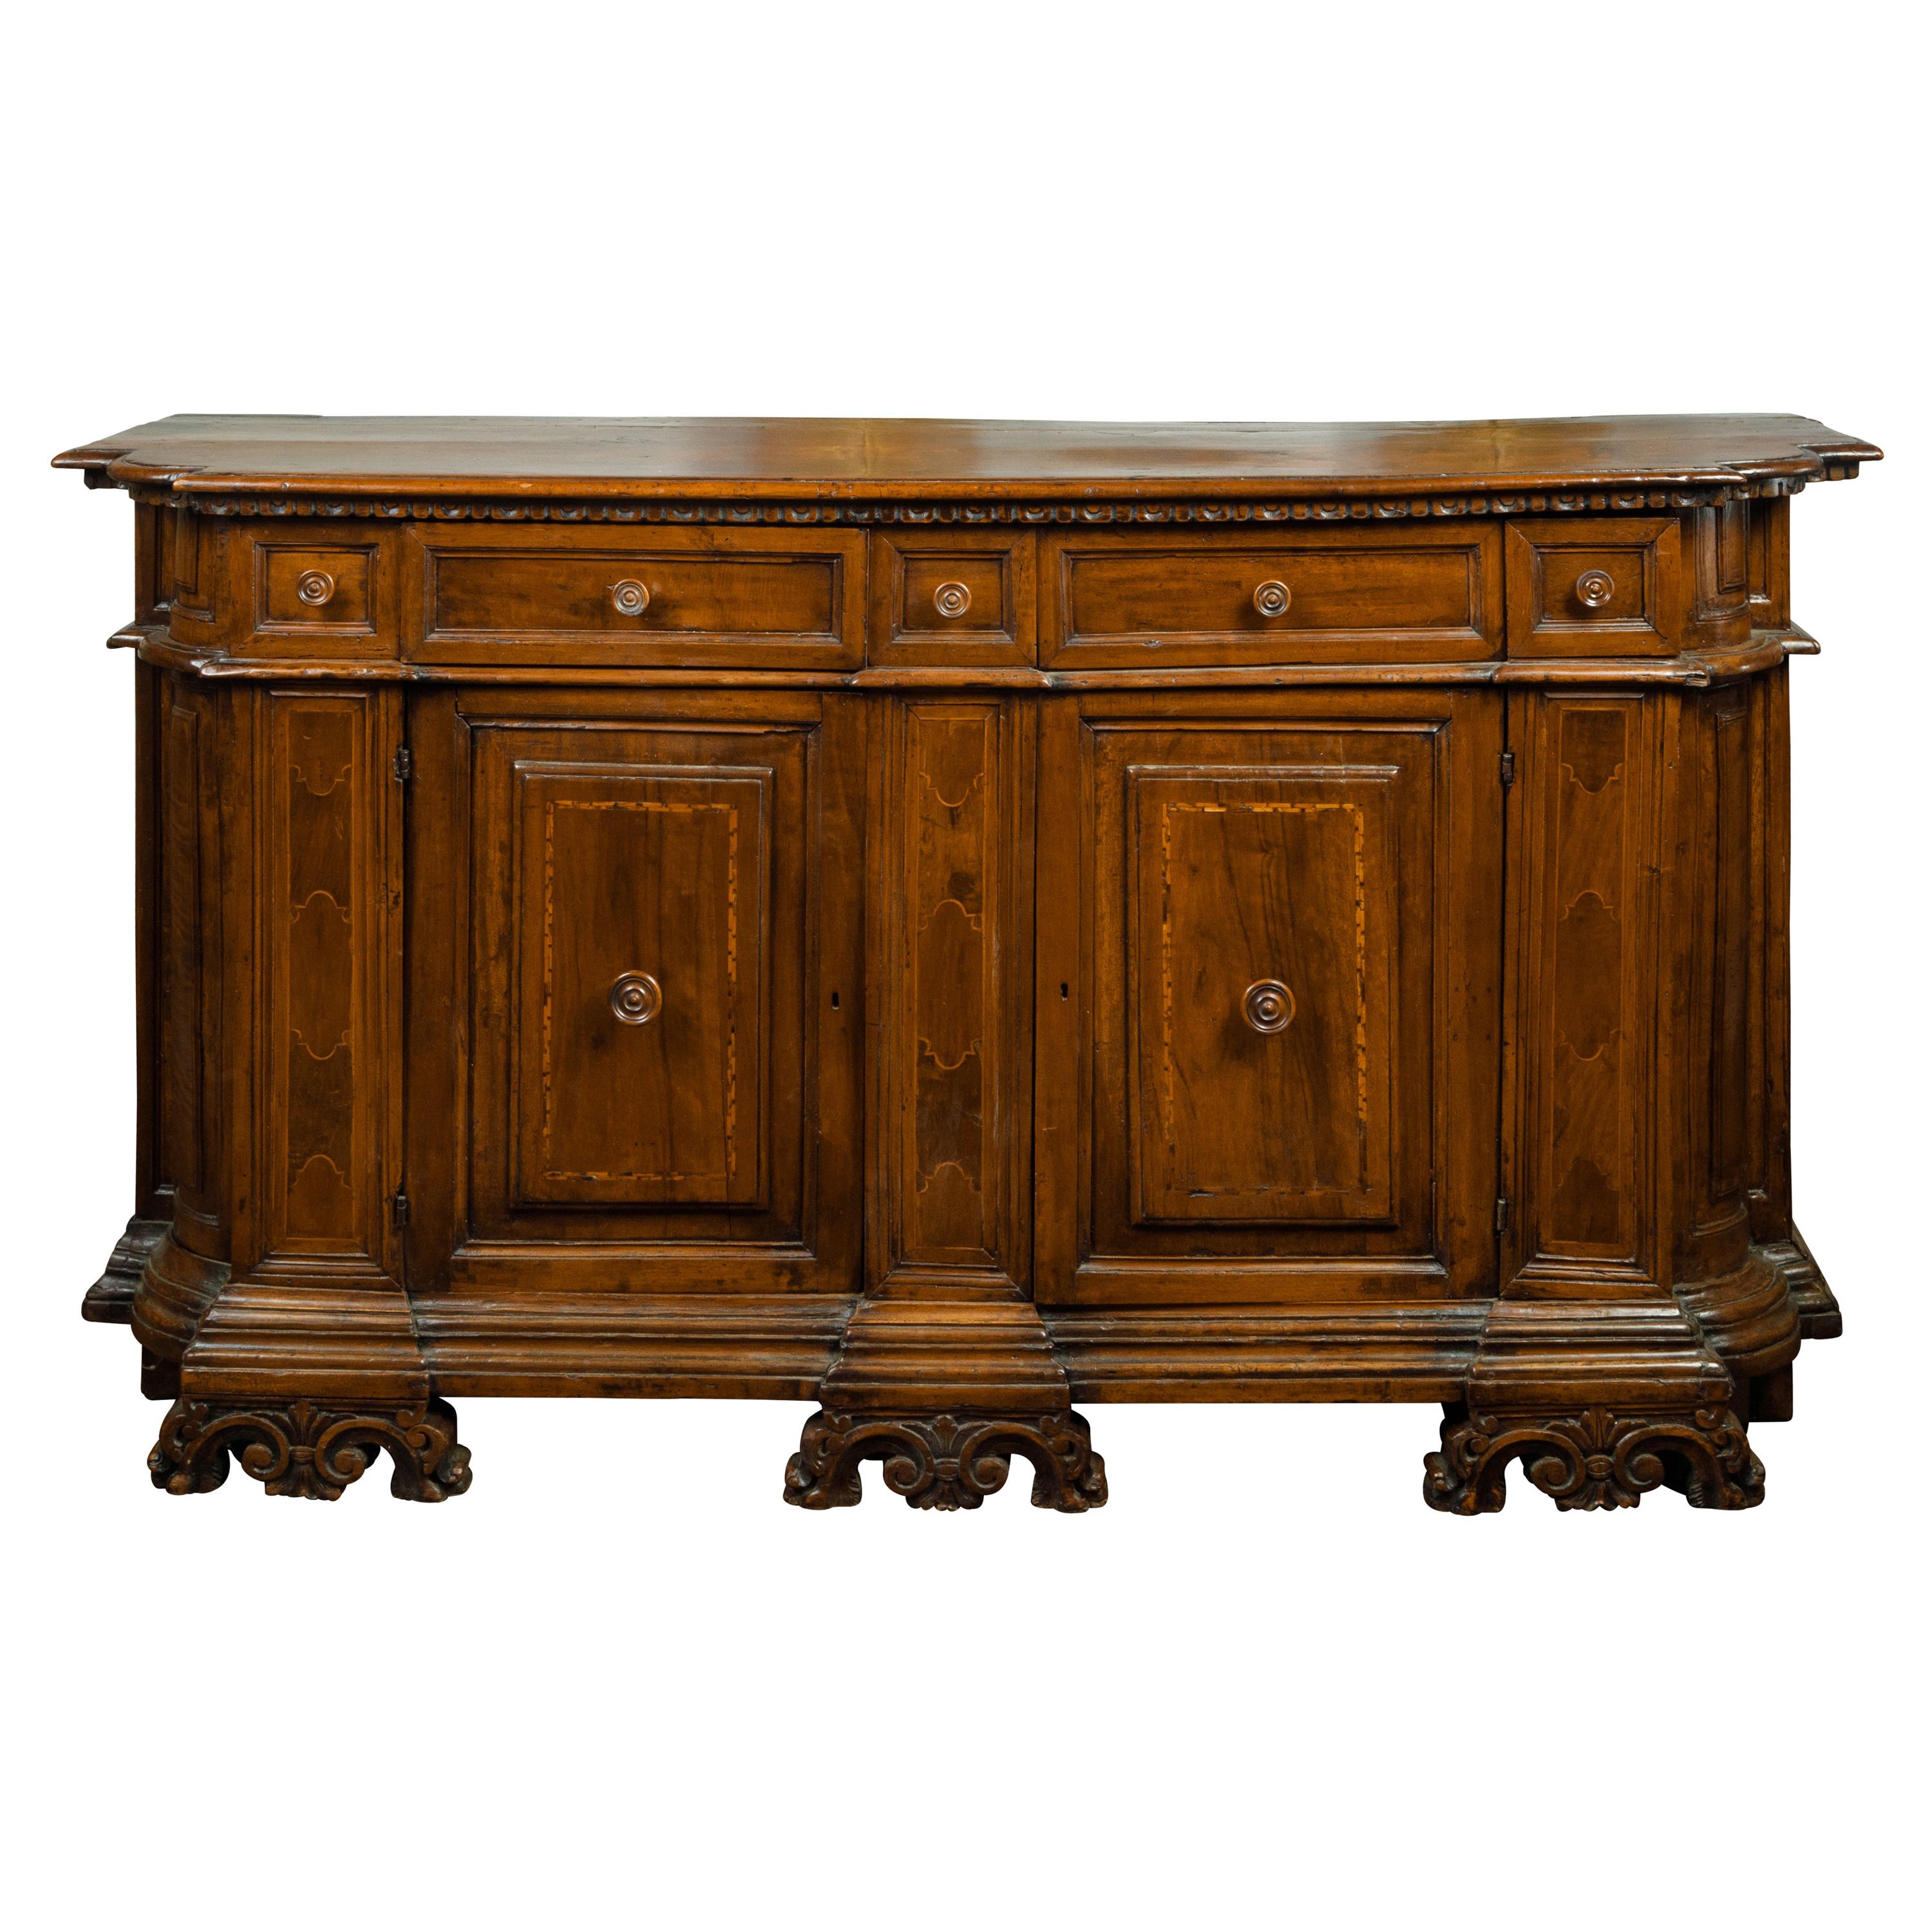 Italian 1800s Walnut Credenza with Drawers, Doors, Inlay and Foliage Carved Feet For Sale